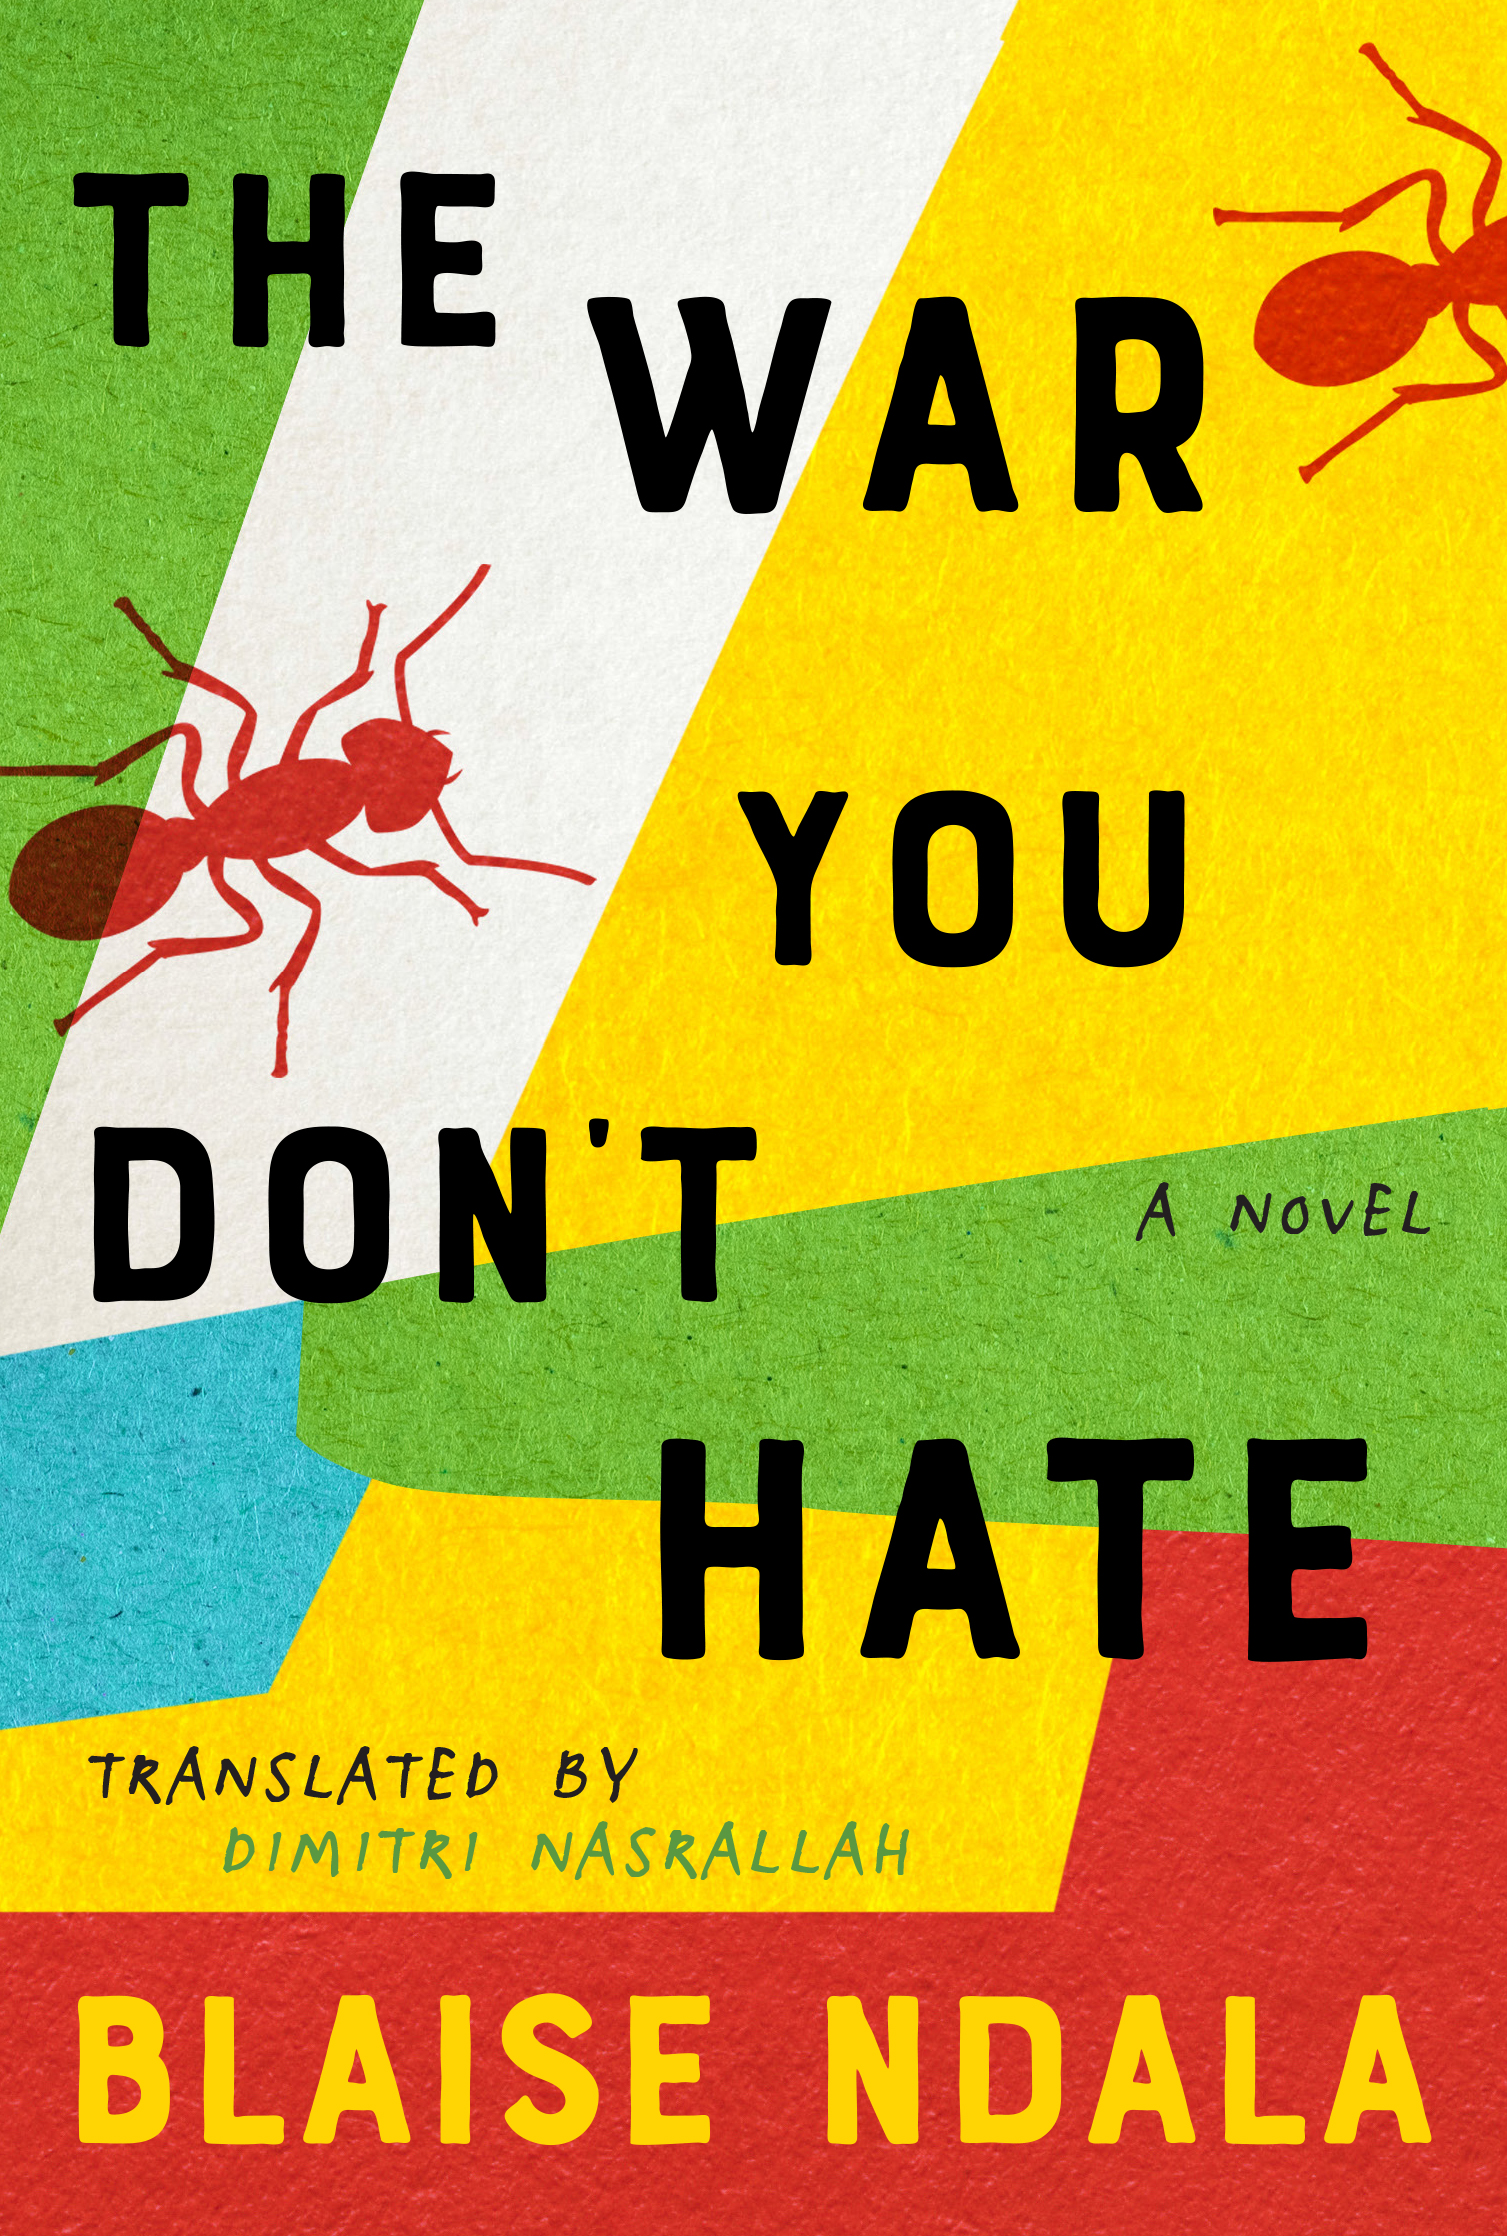 The War You Don’t Hate